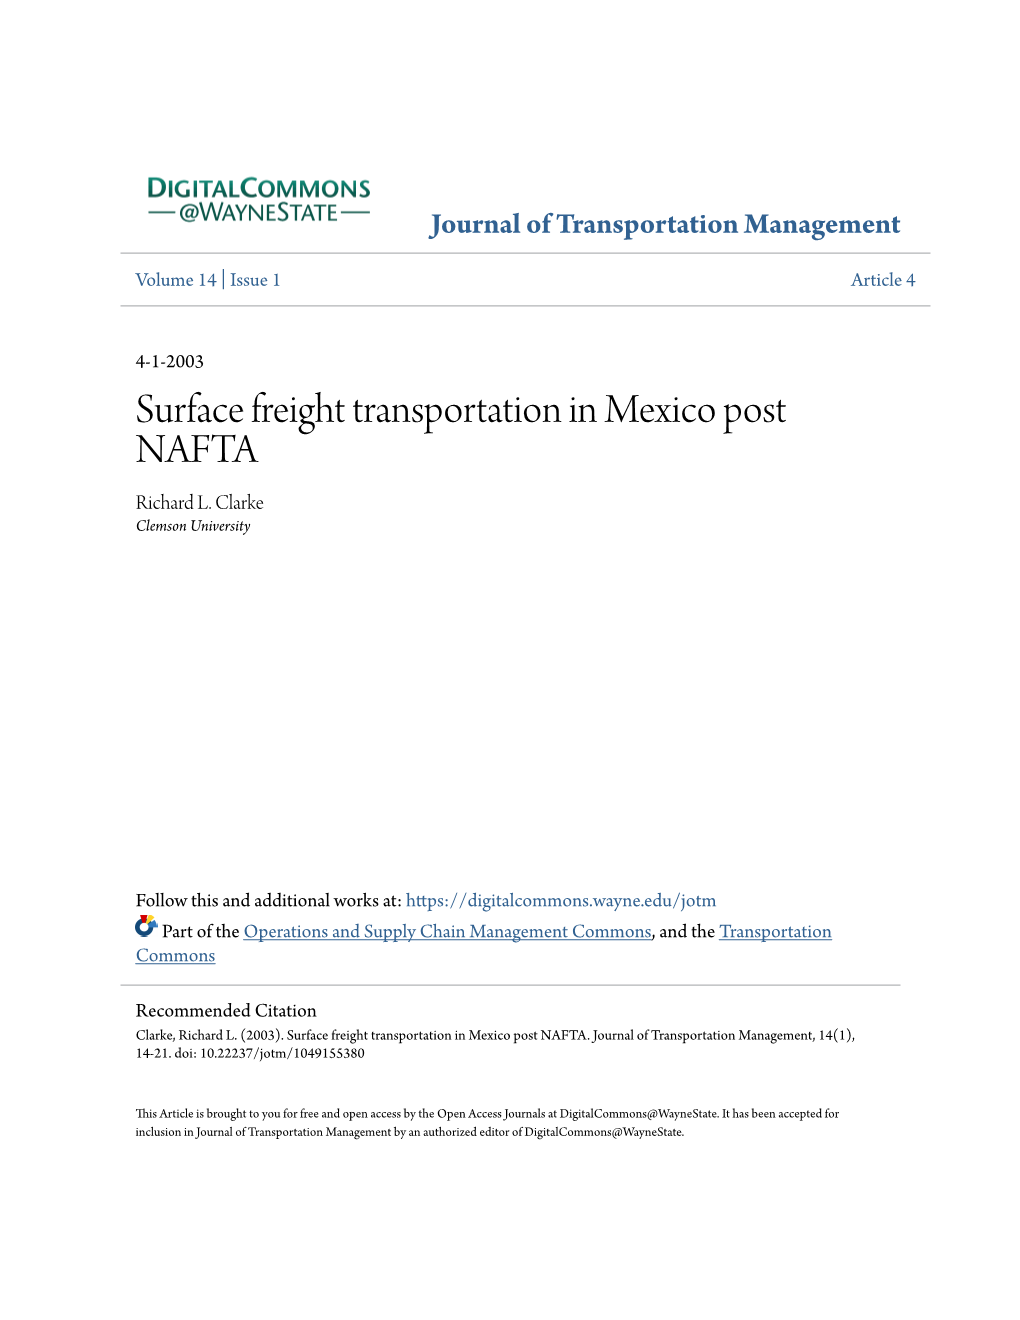 Surface Freight Transportation in Mexico Post NAFTA Richard L